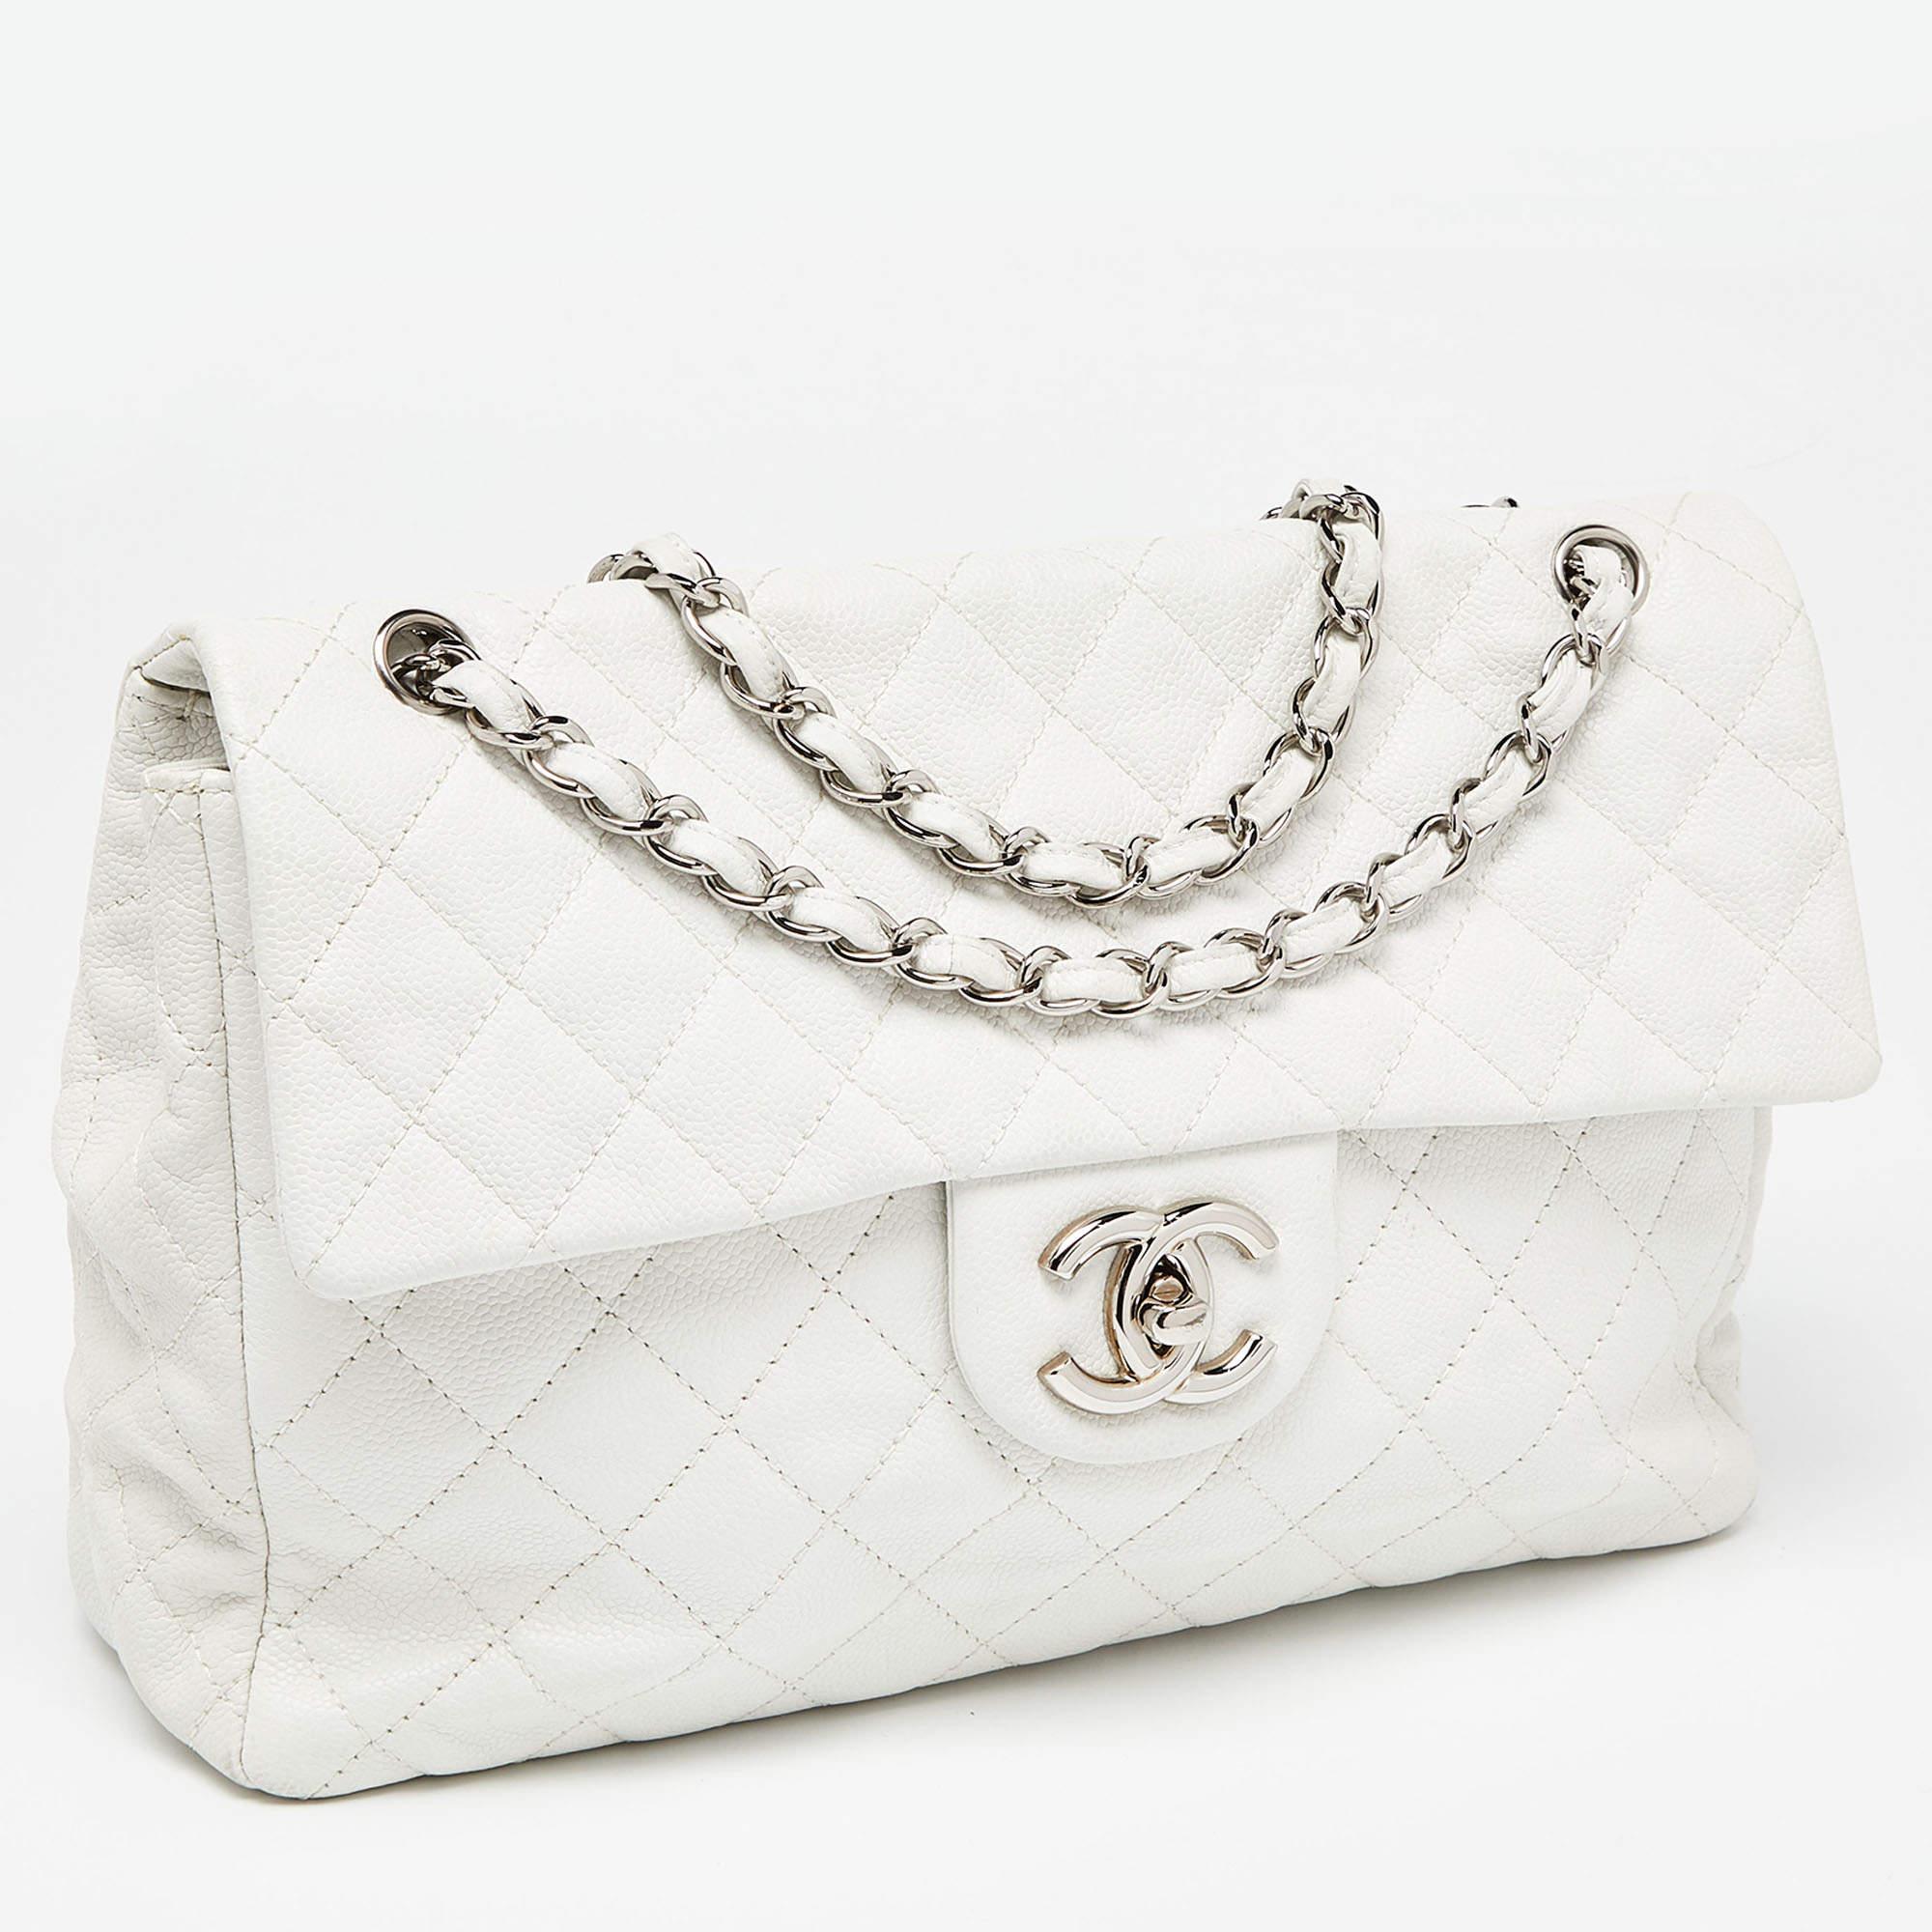 Elevate your style with this Chanel white bag. Merging form and function, this exquisite accessory epitomizes sophistication, ensuring you stand out with elegance and practicality by your side.

